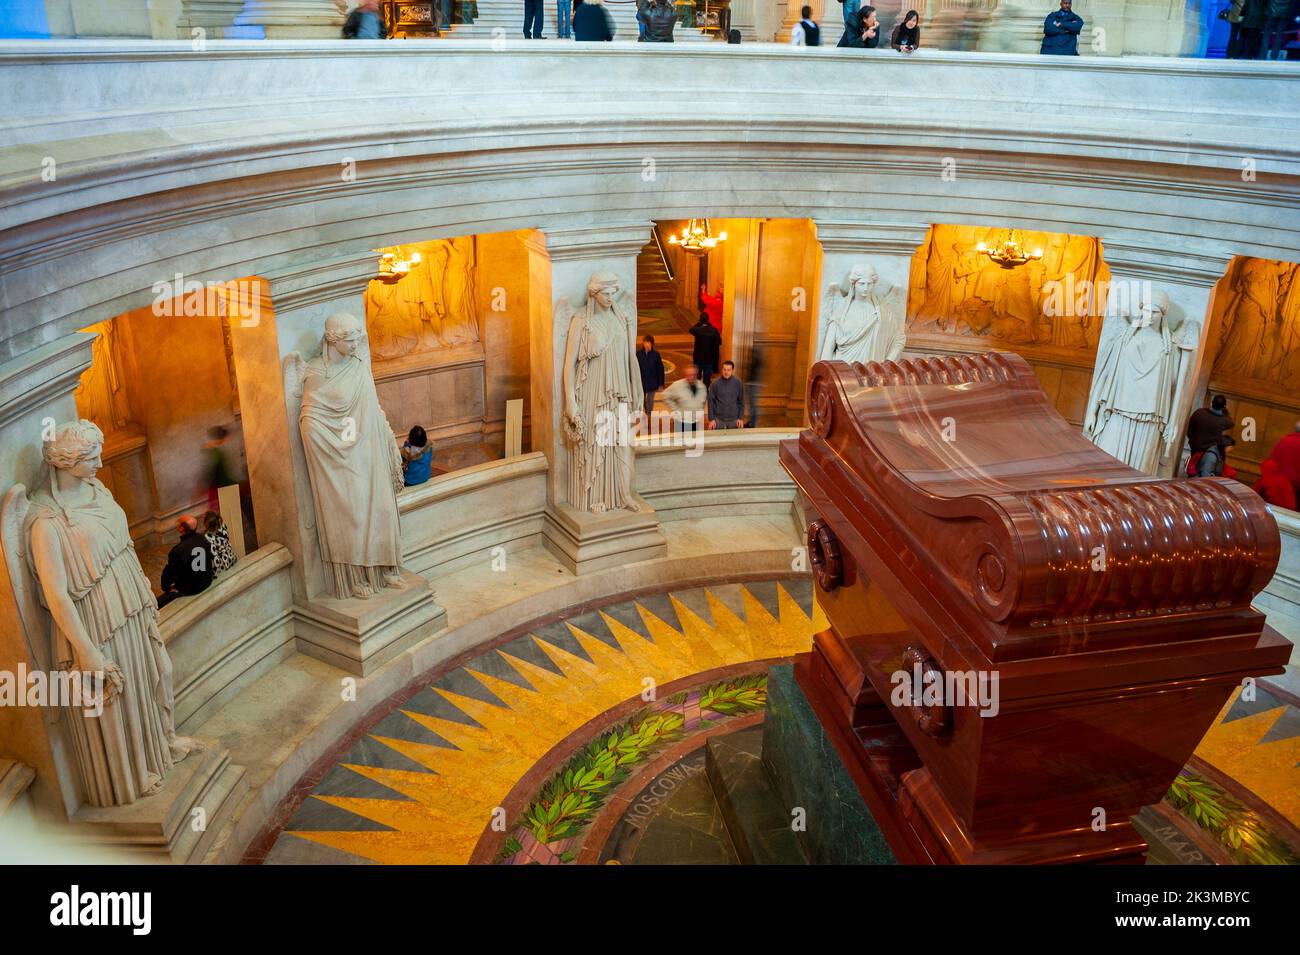 Paris, France - Wide Angle View, Inside, Invalides Army Museum, Architectural Detail, Looking Down, Napolean's Tomb, Sculptures by James Pradier. Stock Photo